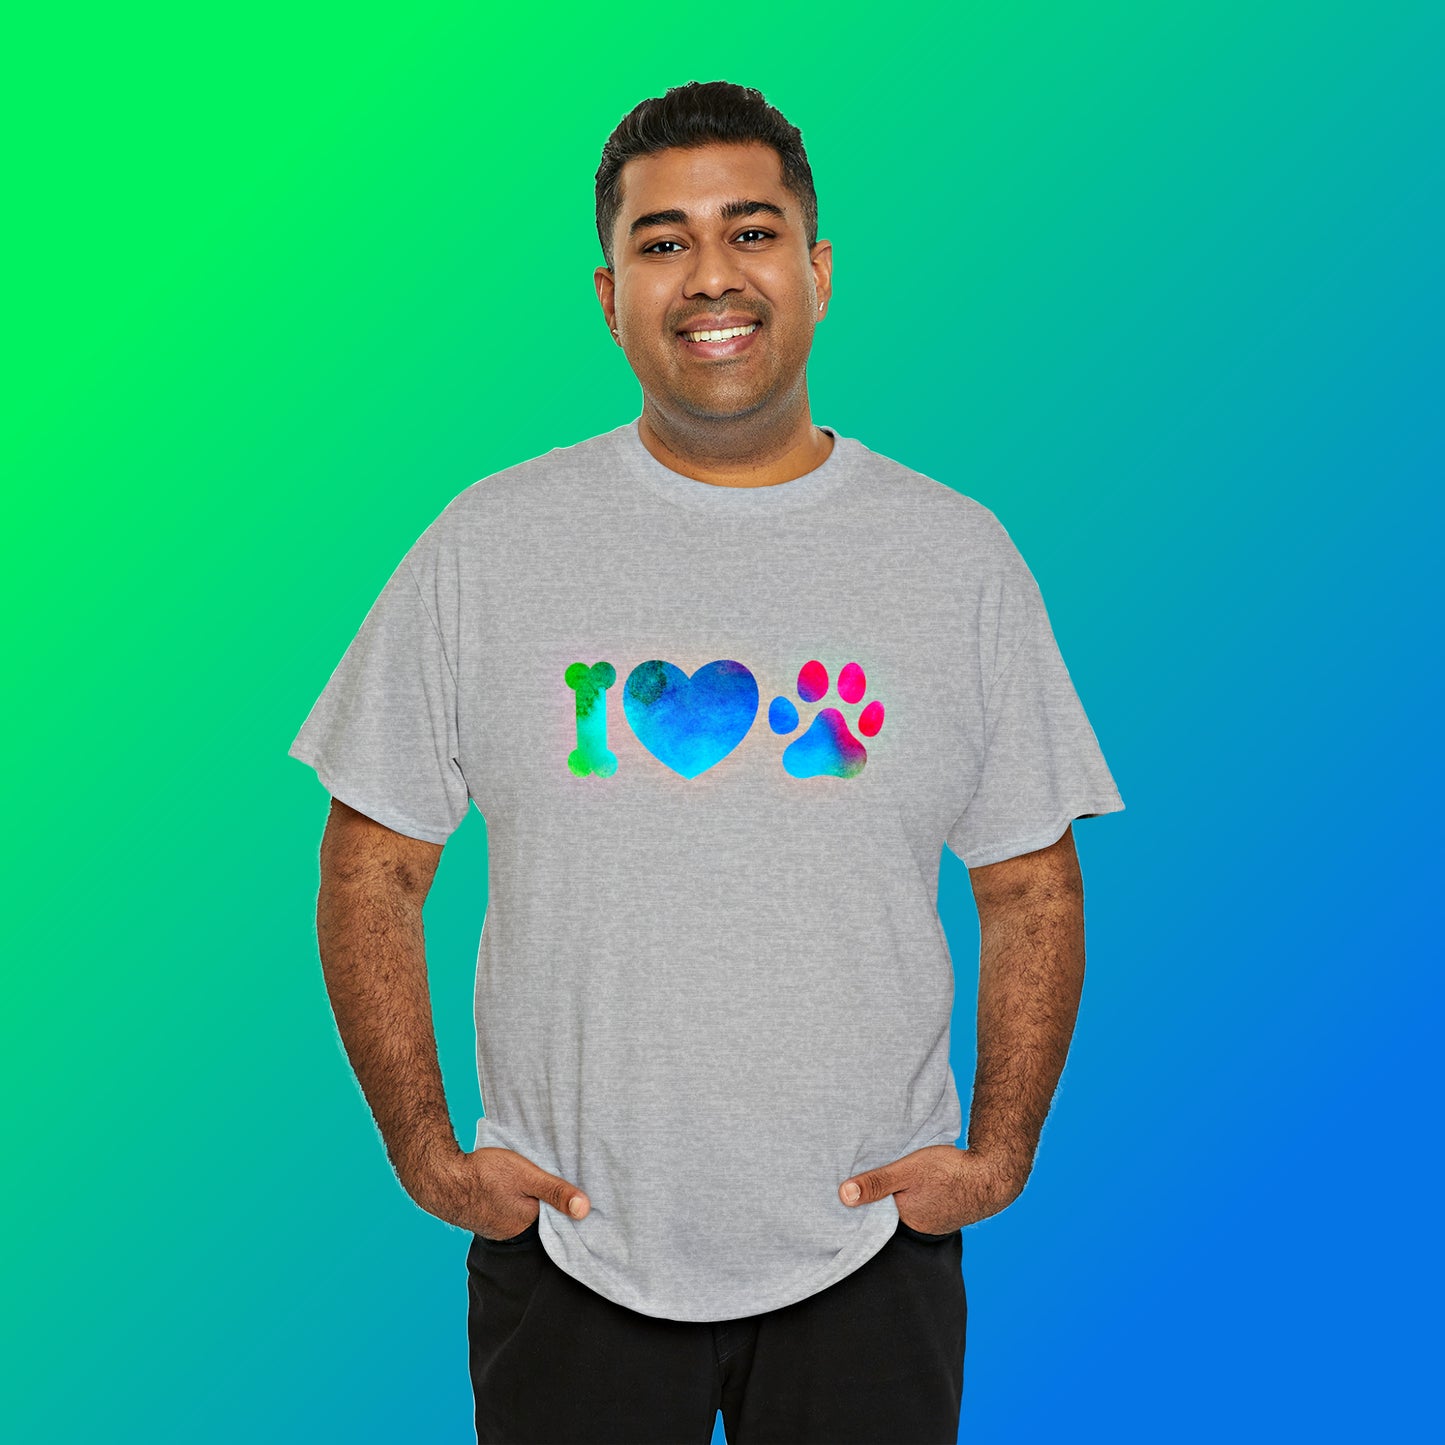 Mock up of a happy man wearing our shirt